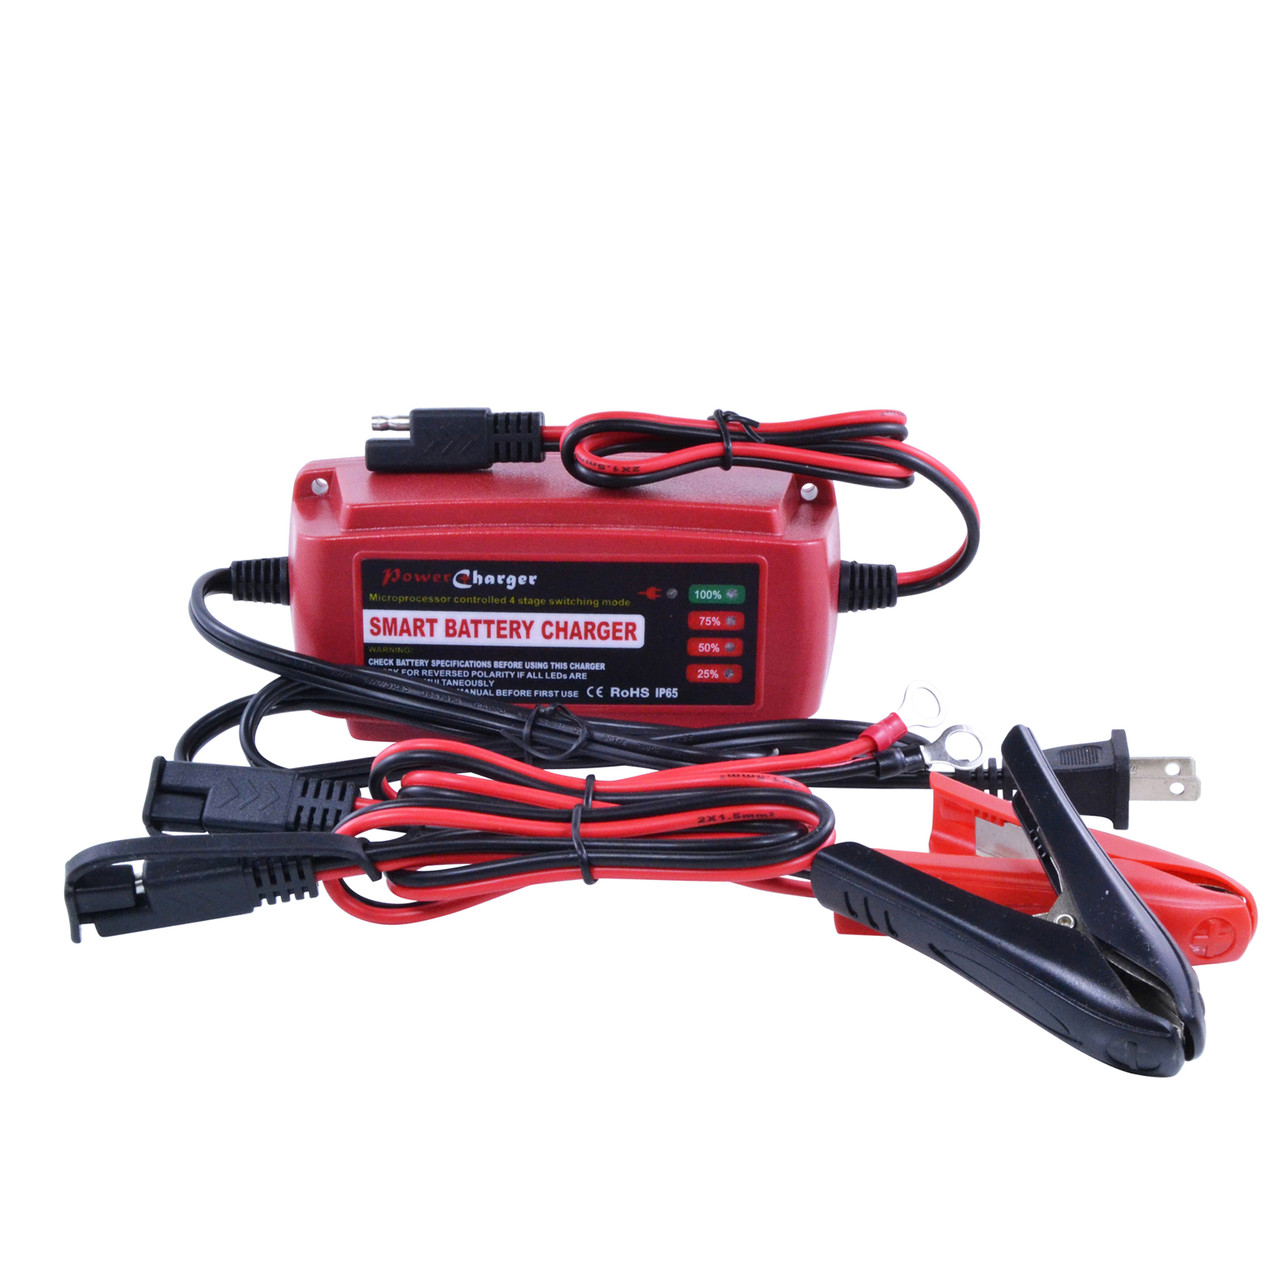 RMSTATOR New Aftermarket Universal Universal Automatic IP65 Smart Battery Charger 12V / 5A / 100W, RMS200-103844